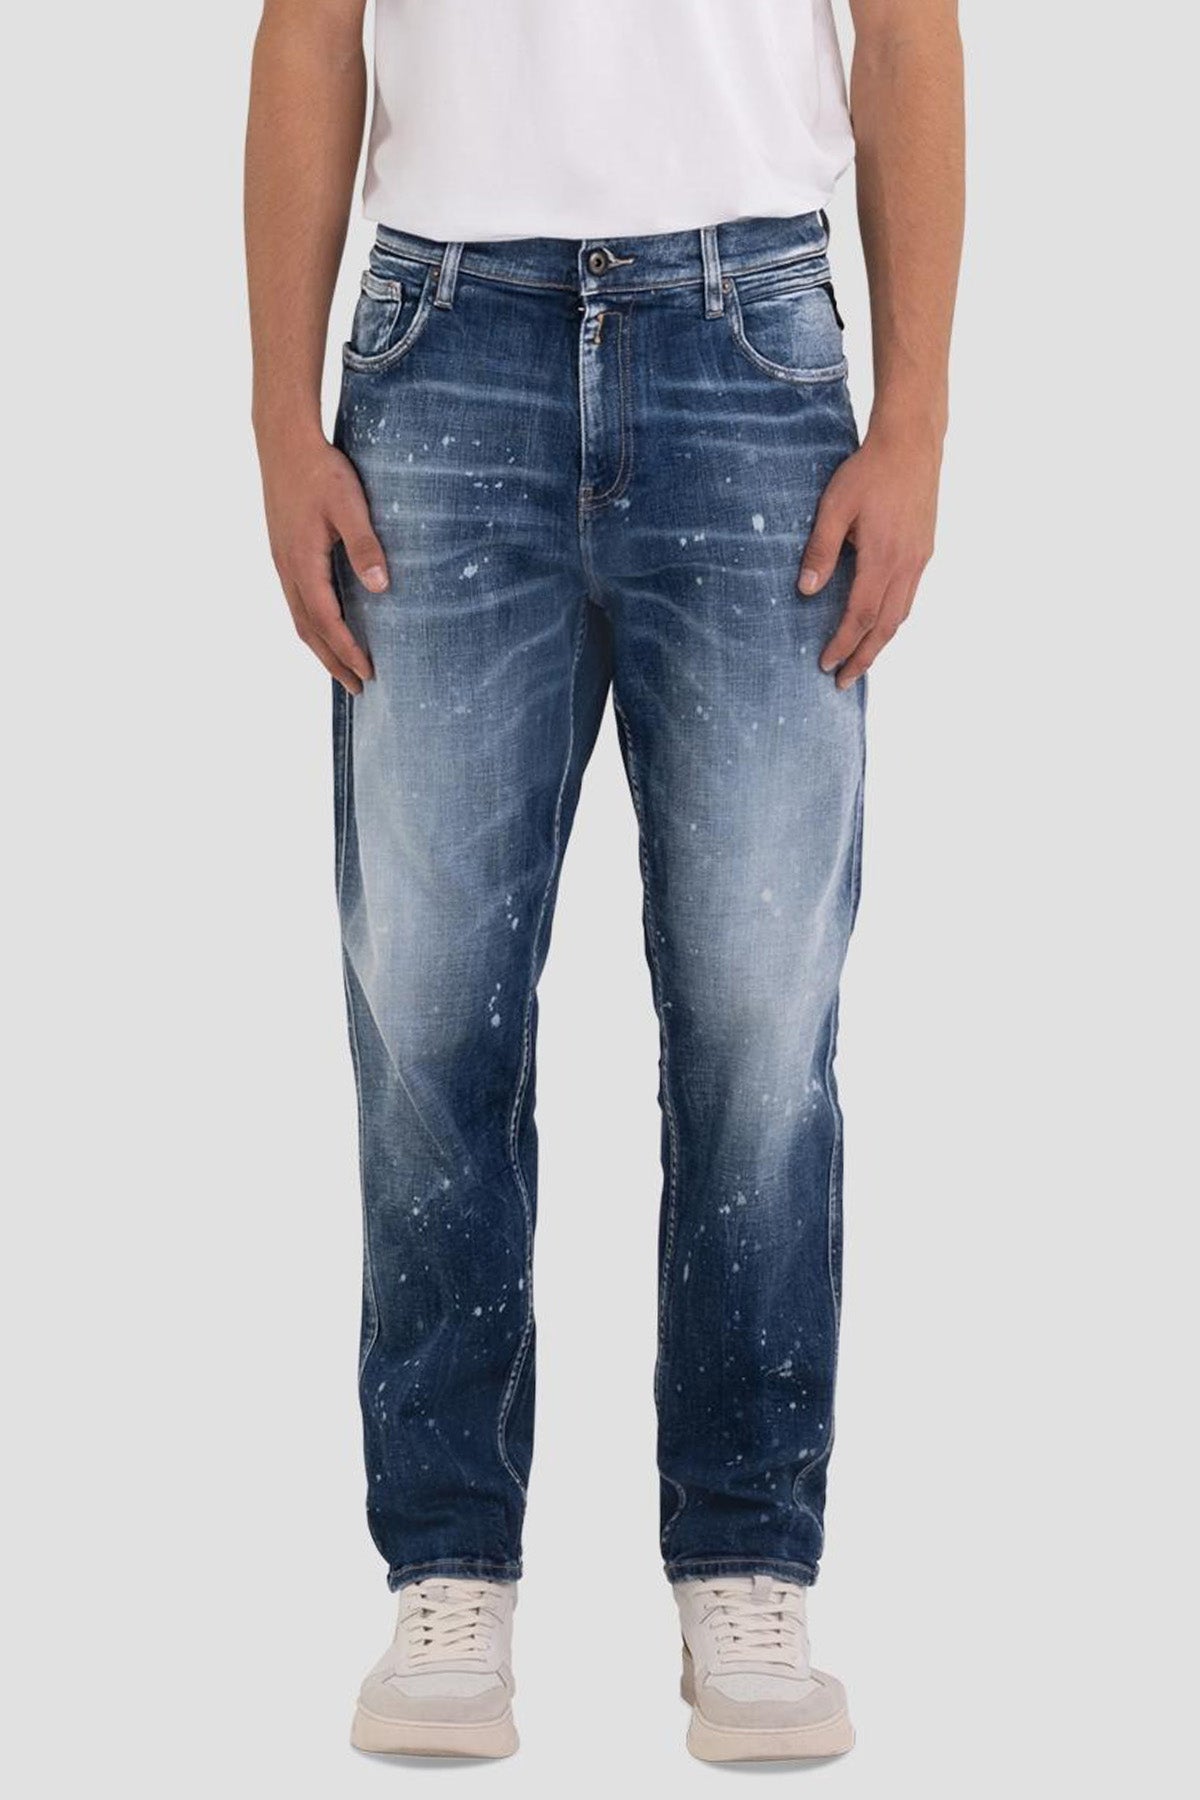 Replay Sandot Relaxed Tapered Fit Jeans-Libas Trendy Fashion Store